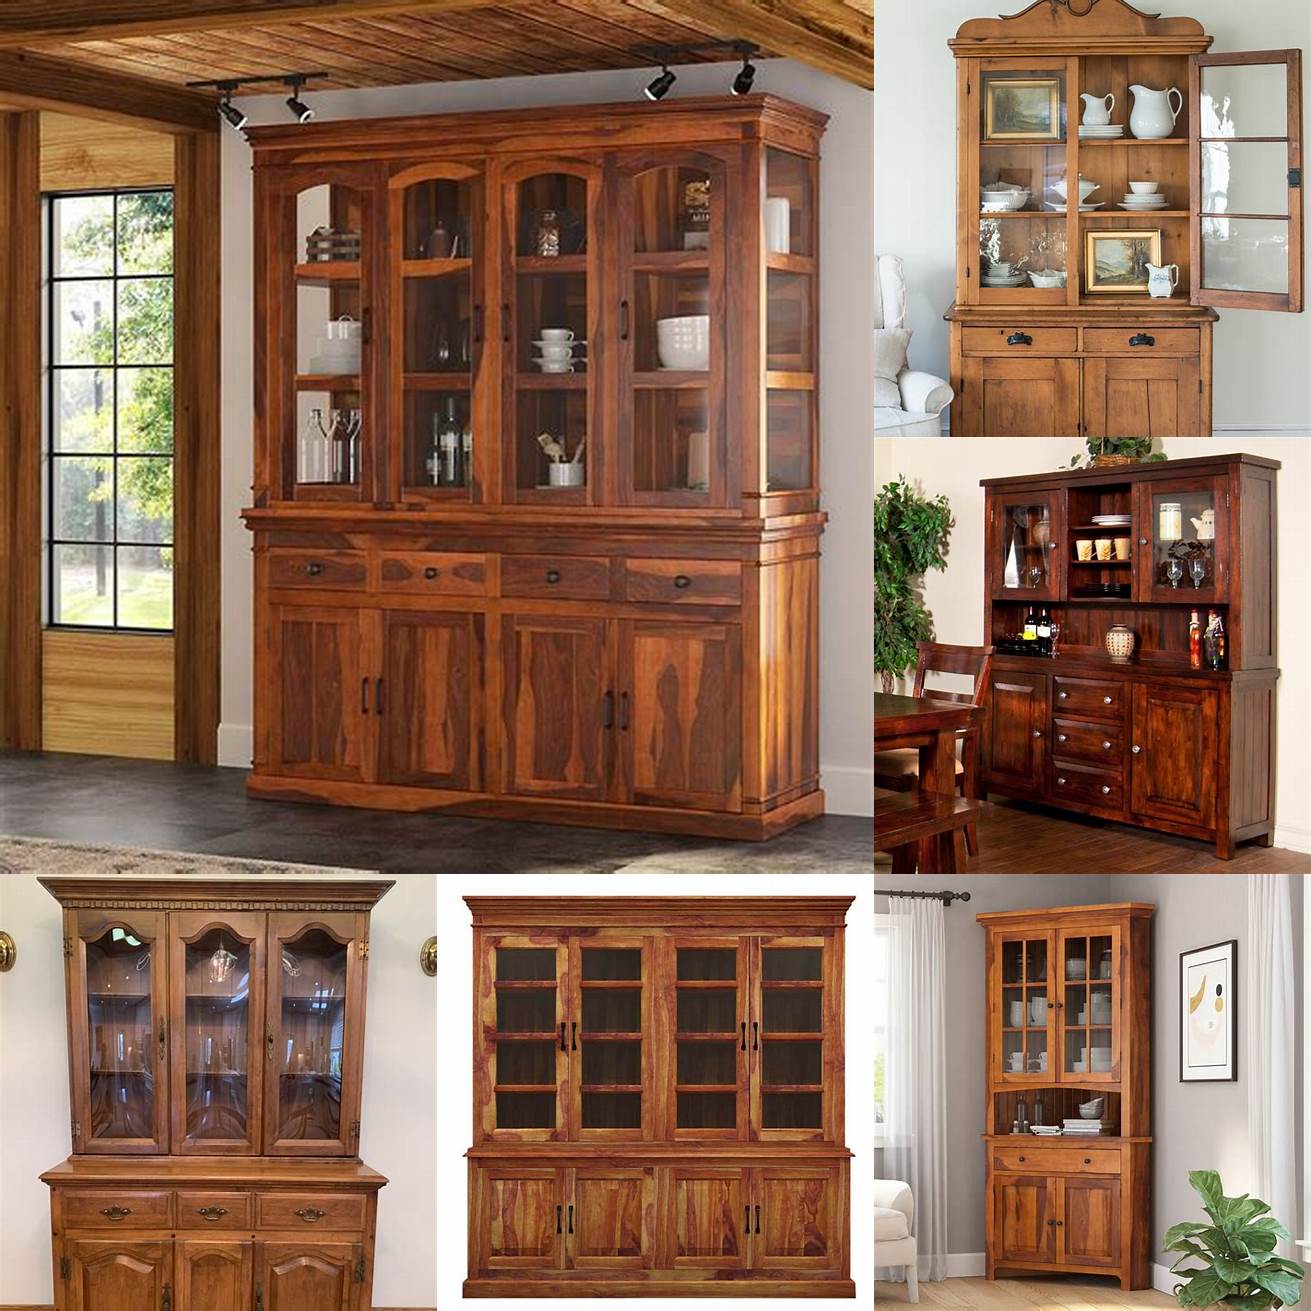 Antique-inspired wooden hutch with glass doors